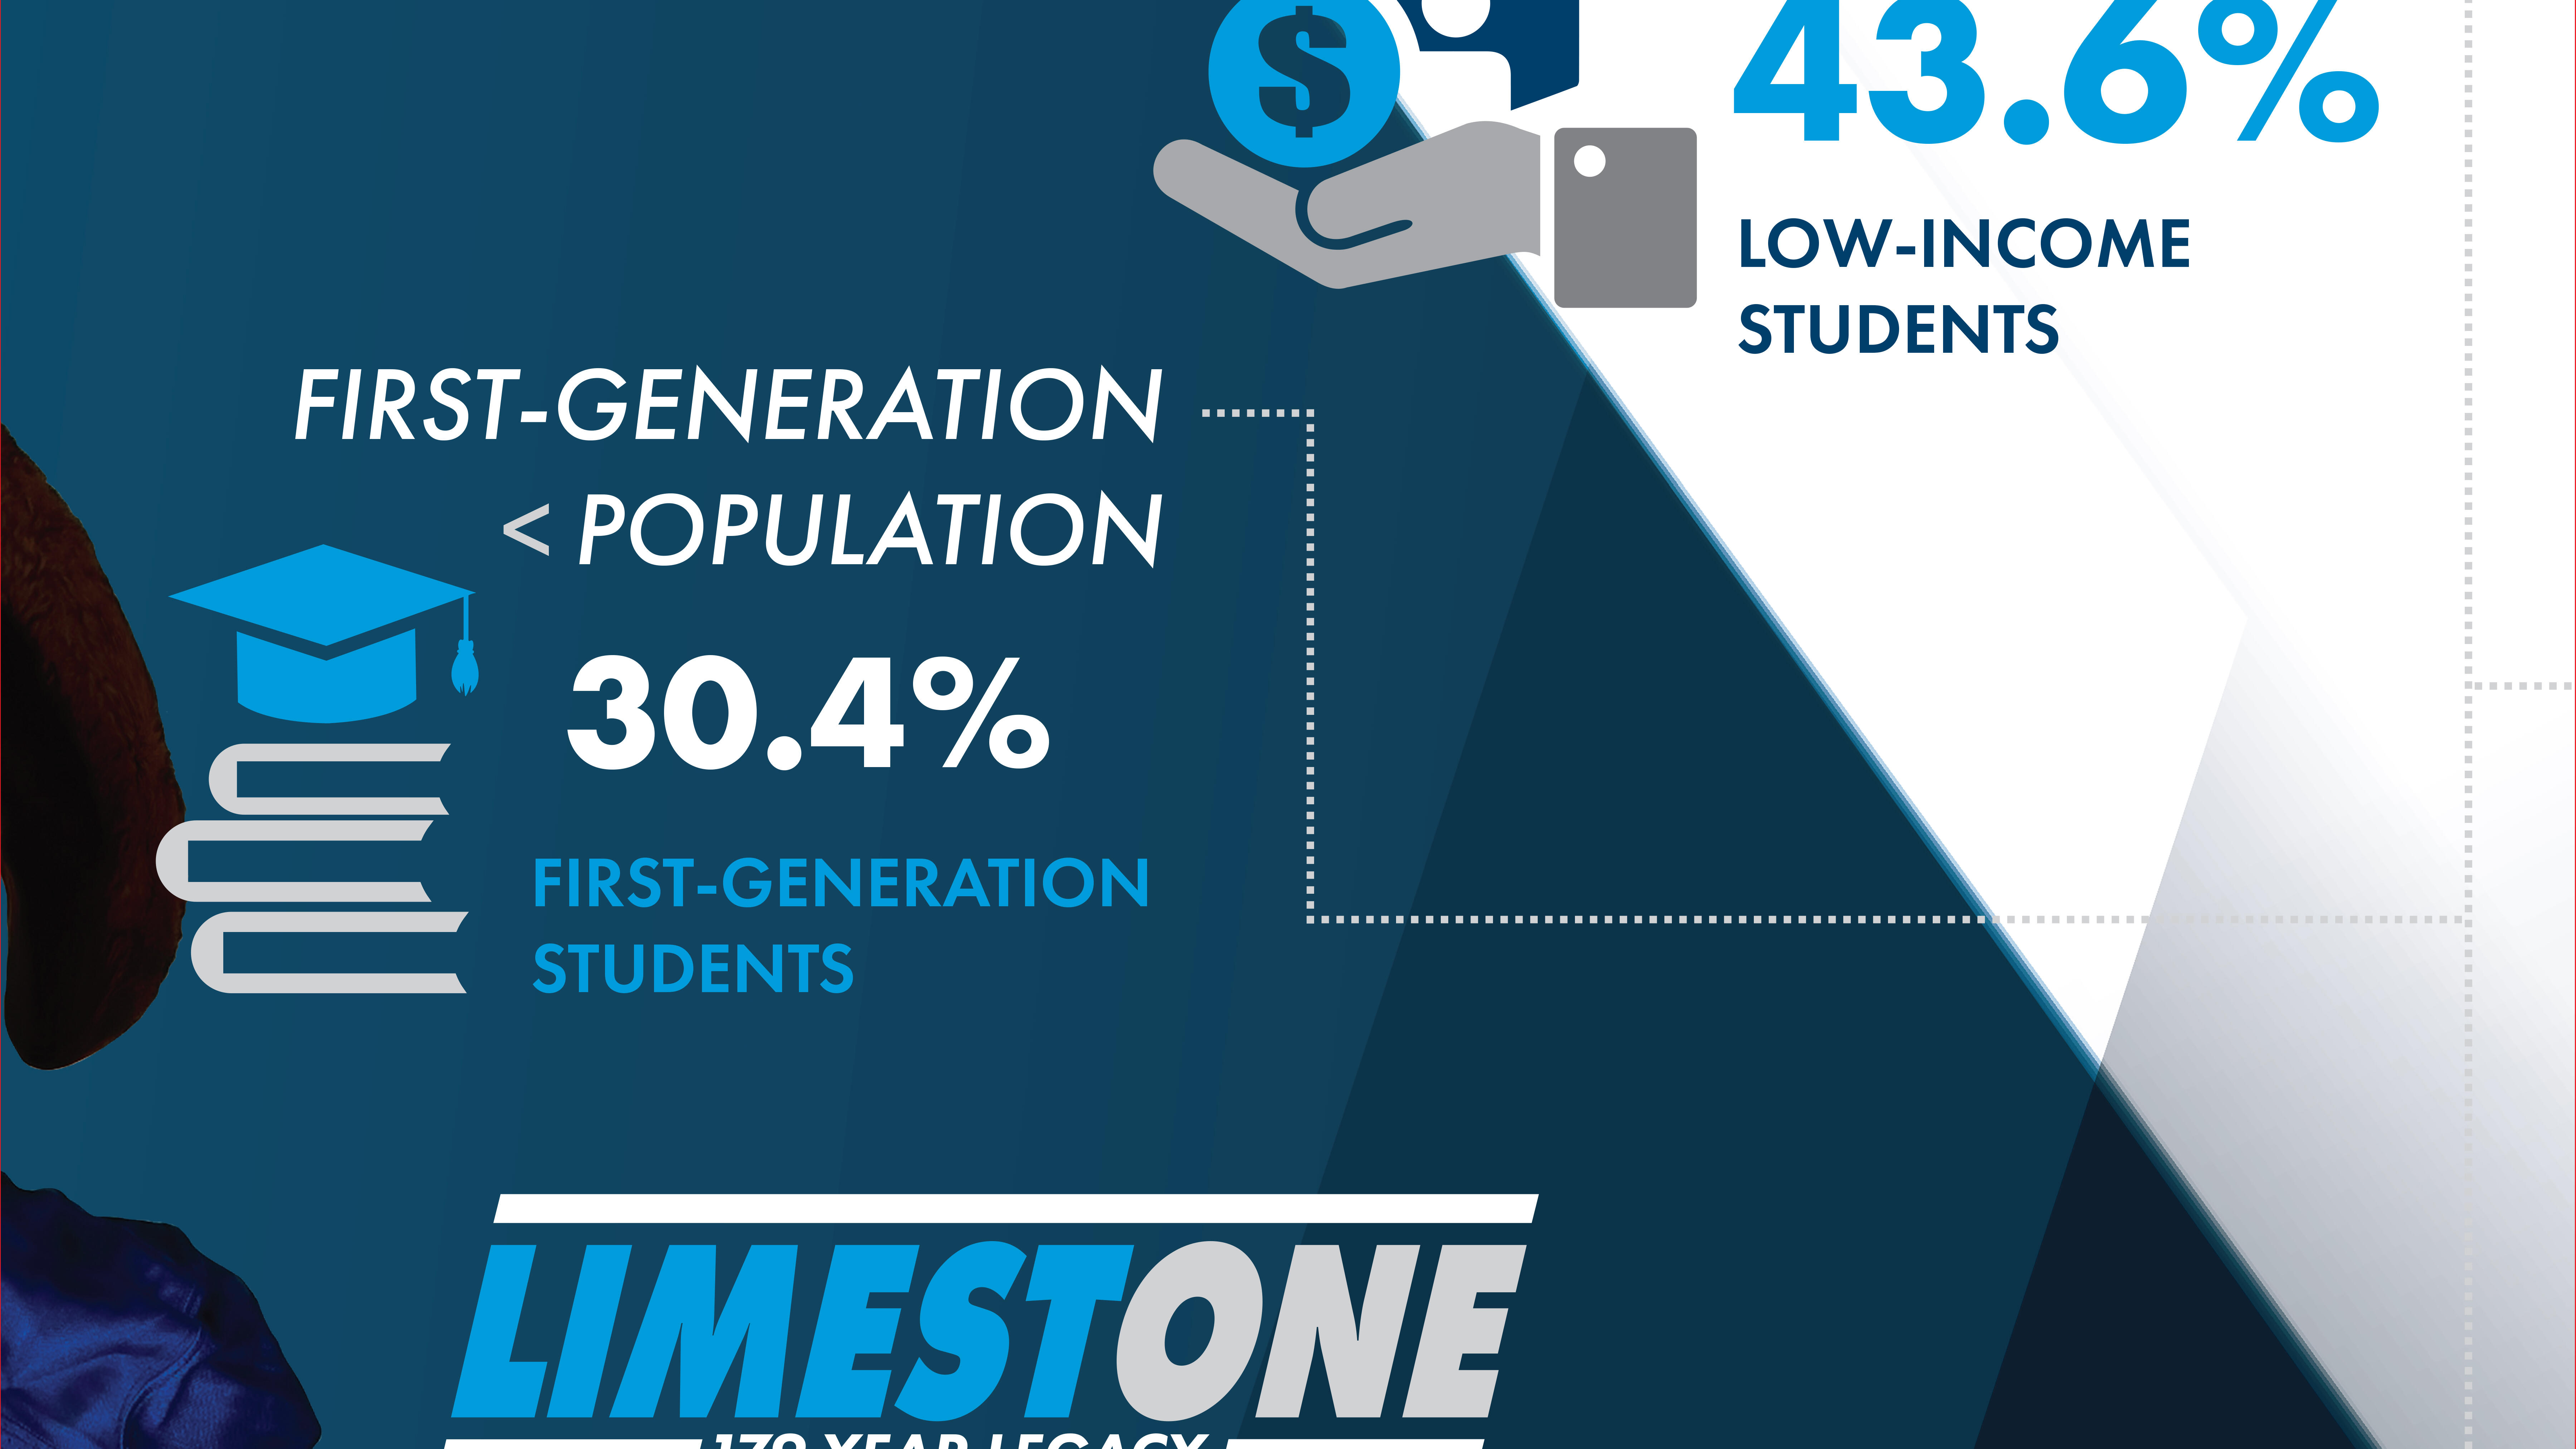 97.2% Post Graduation were employed, continued education or went into the military. 43.6% are Low-Income students, 30.4% are first generation students, Limestone has a 179 Year Legacy